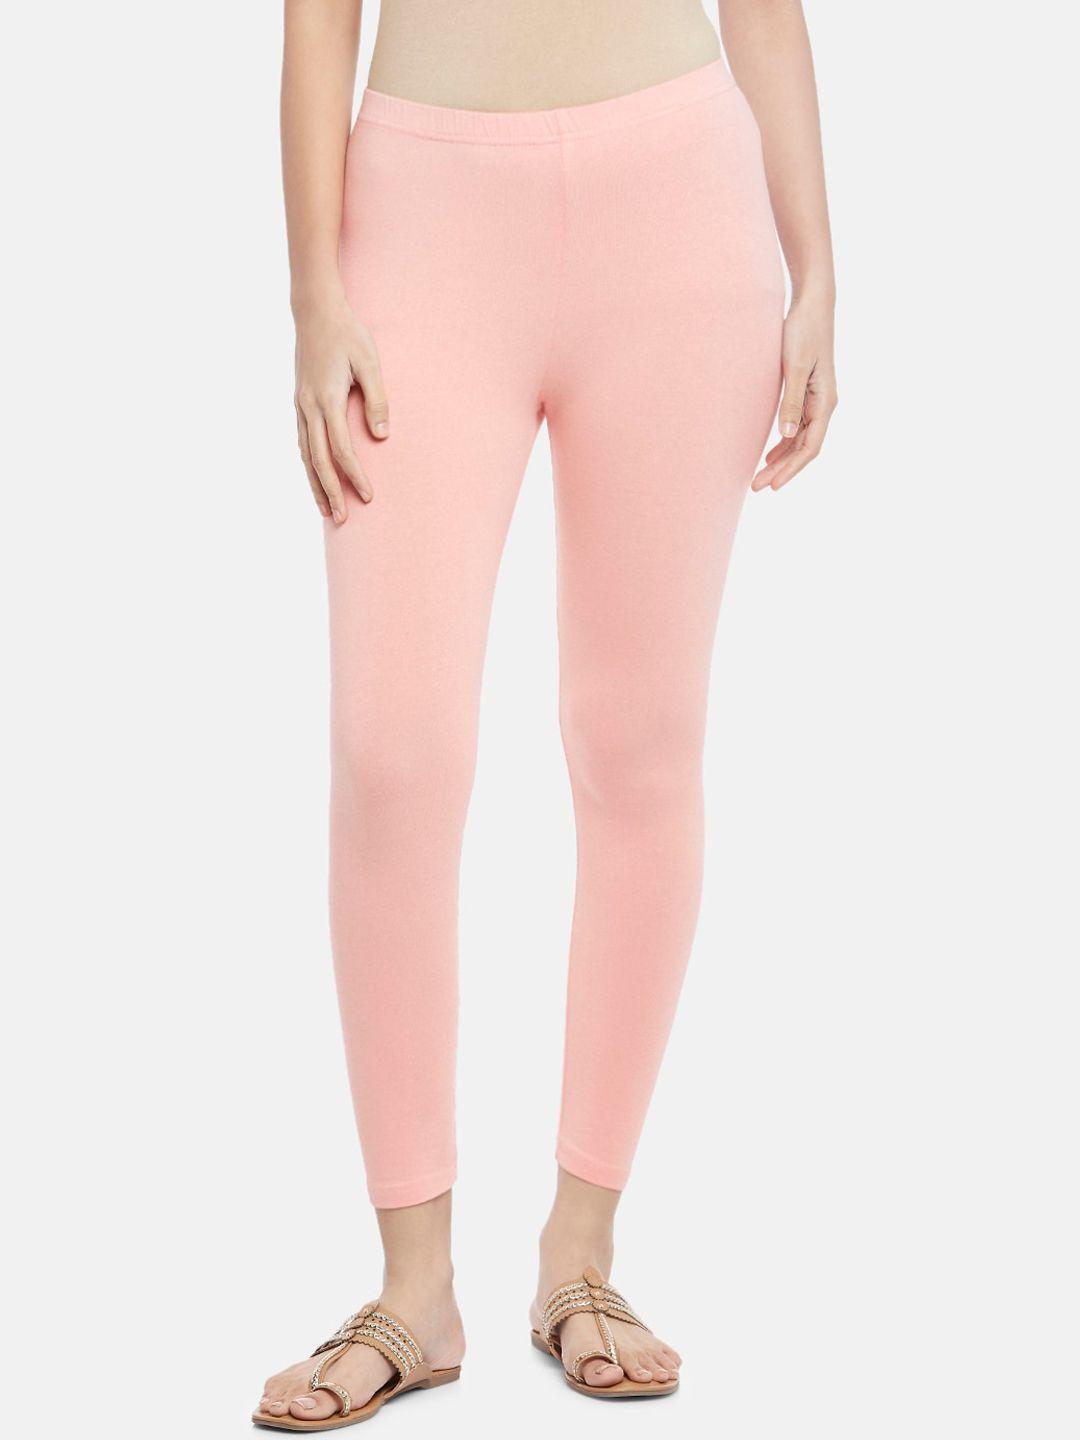 rangmanch by pantaloons women pink solid cotton ankle-length leggings